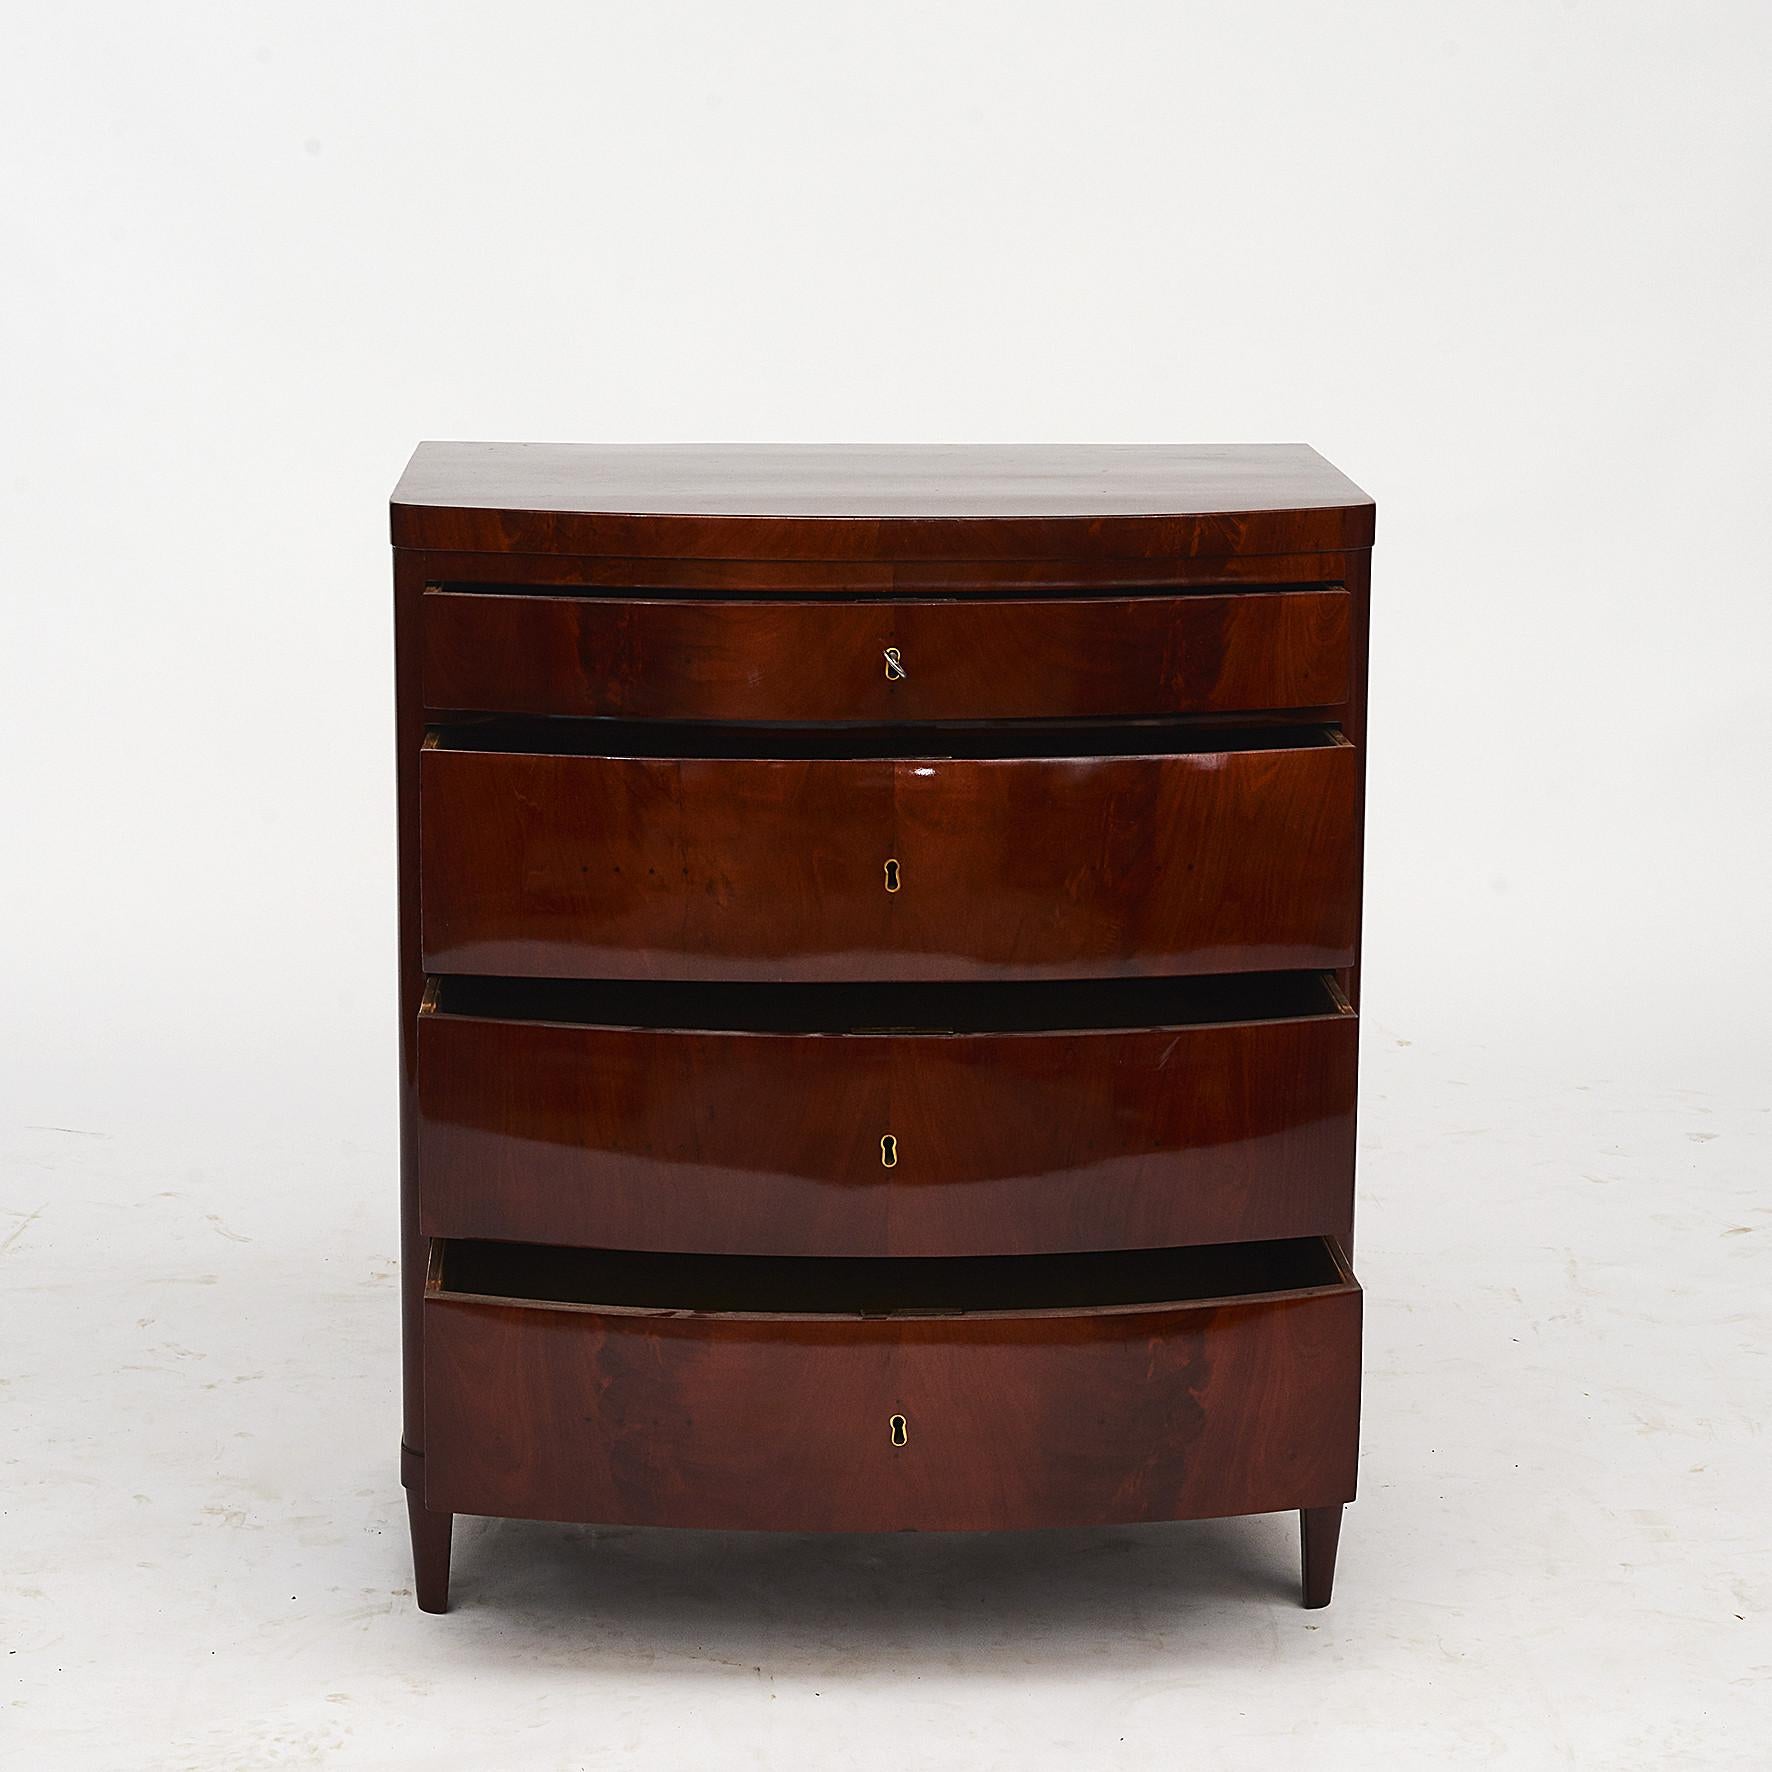 Pair of Danish Empire chest of drawers with bow-front. Mahogany veneered on oak, original brass hardware and key.
Original condition, but finished with a very gentle shellac hand polish (French polish).
Copenhagen, Denmark, circa 1810.